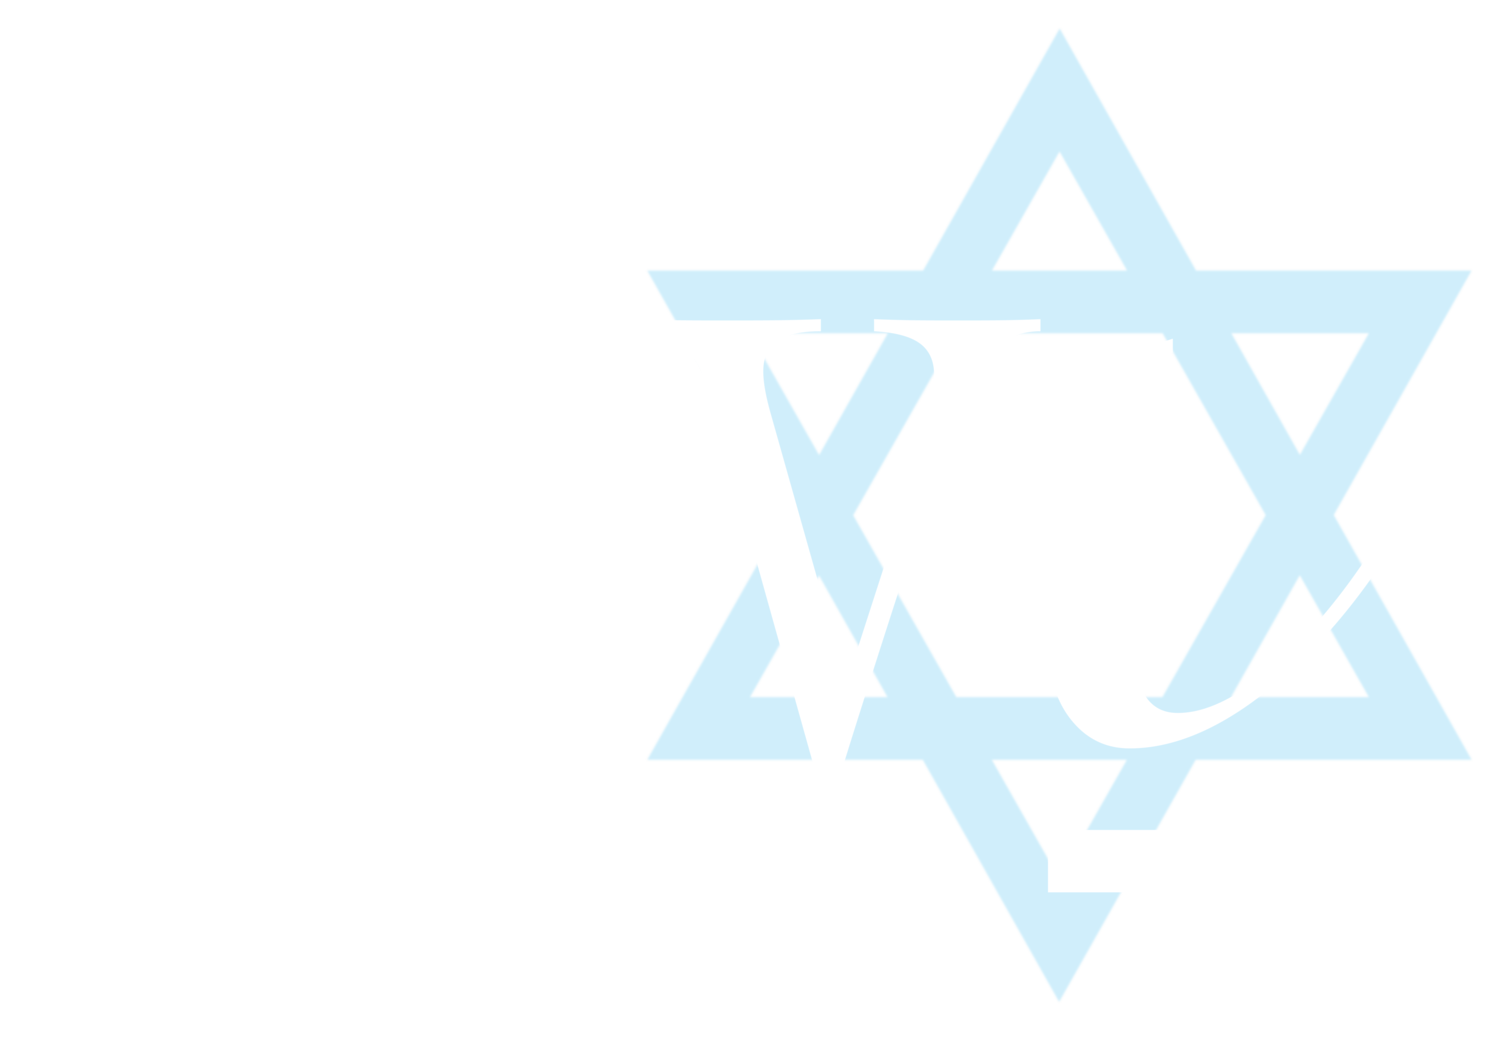 Christian Witness to Israel - North America